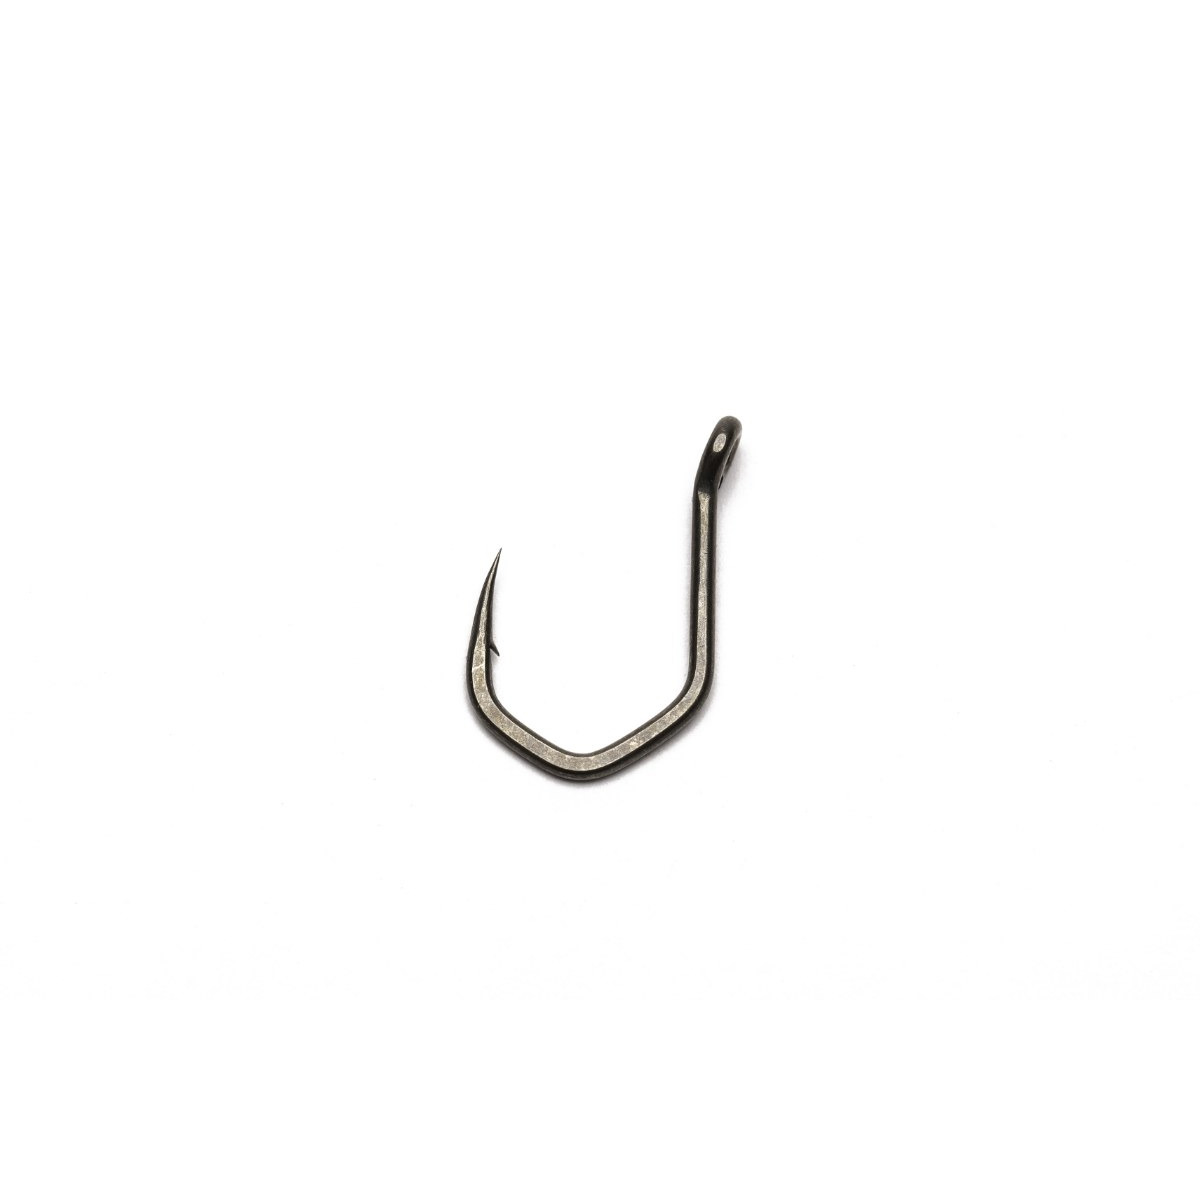 Nash Chod Claw - Size 6 Micro Barbed